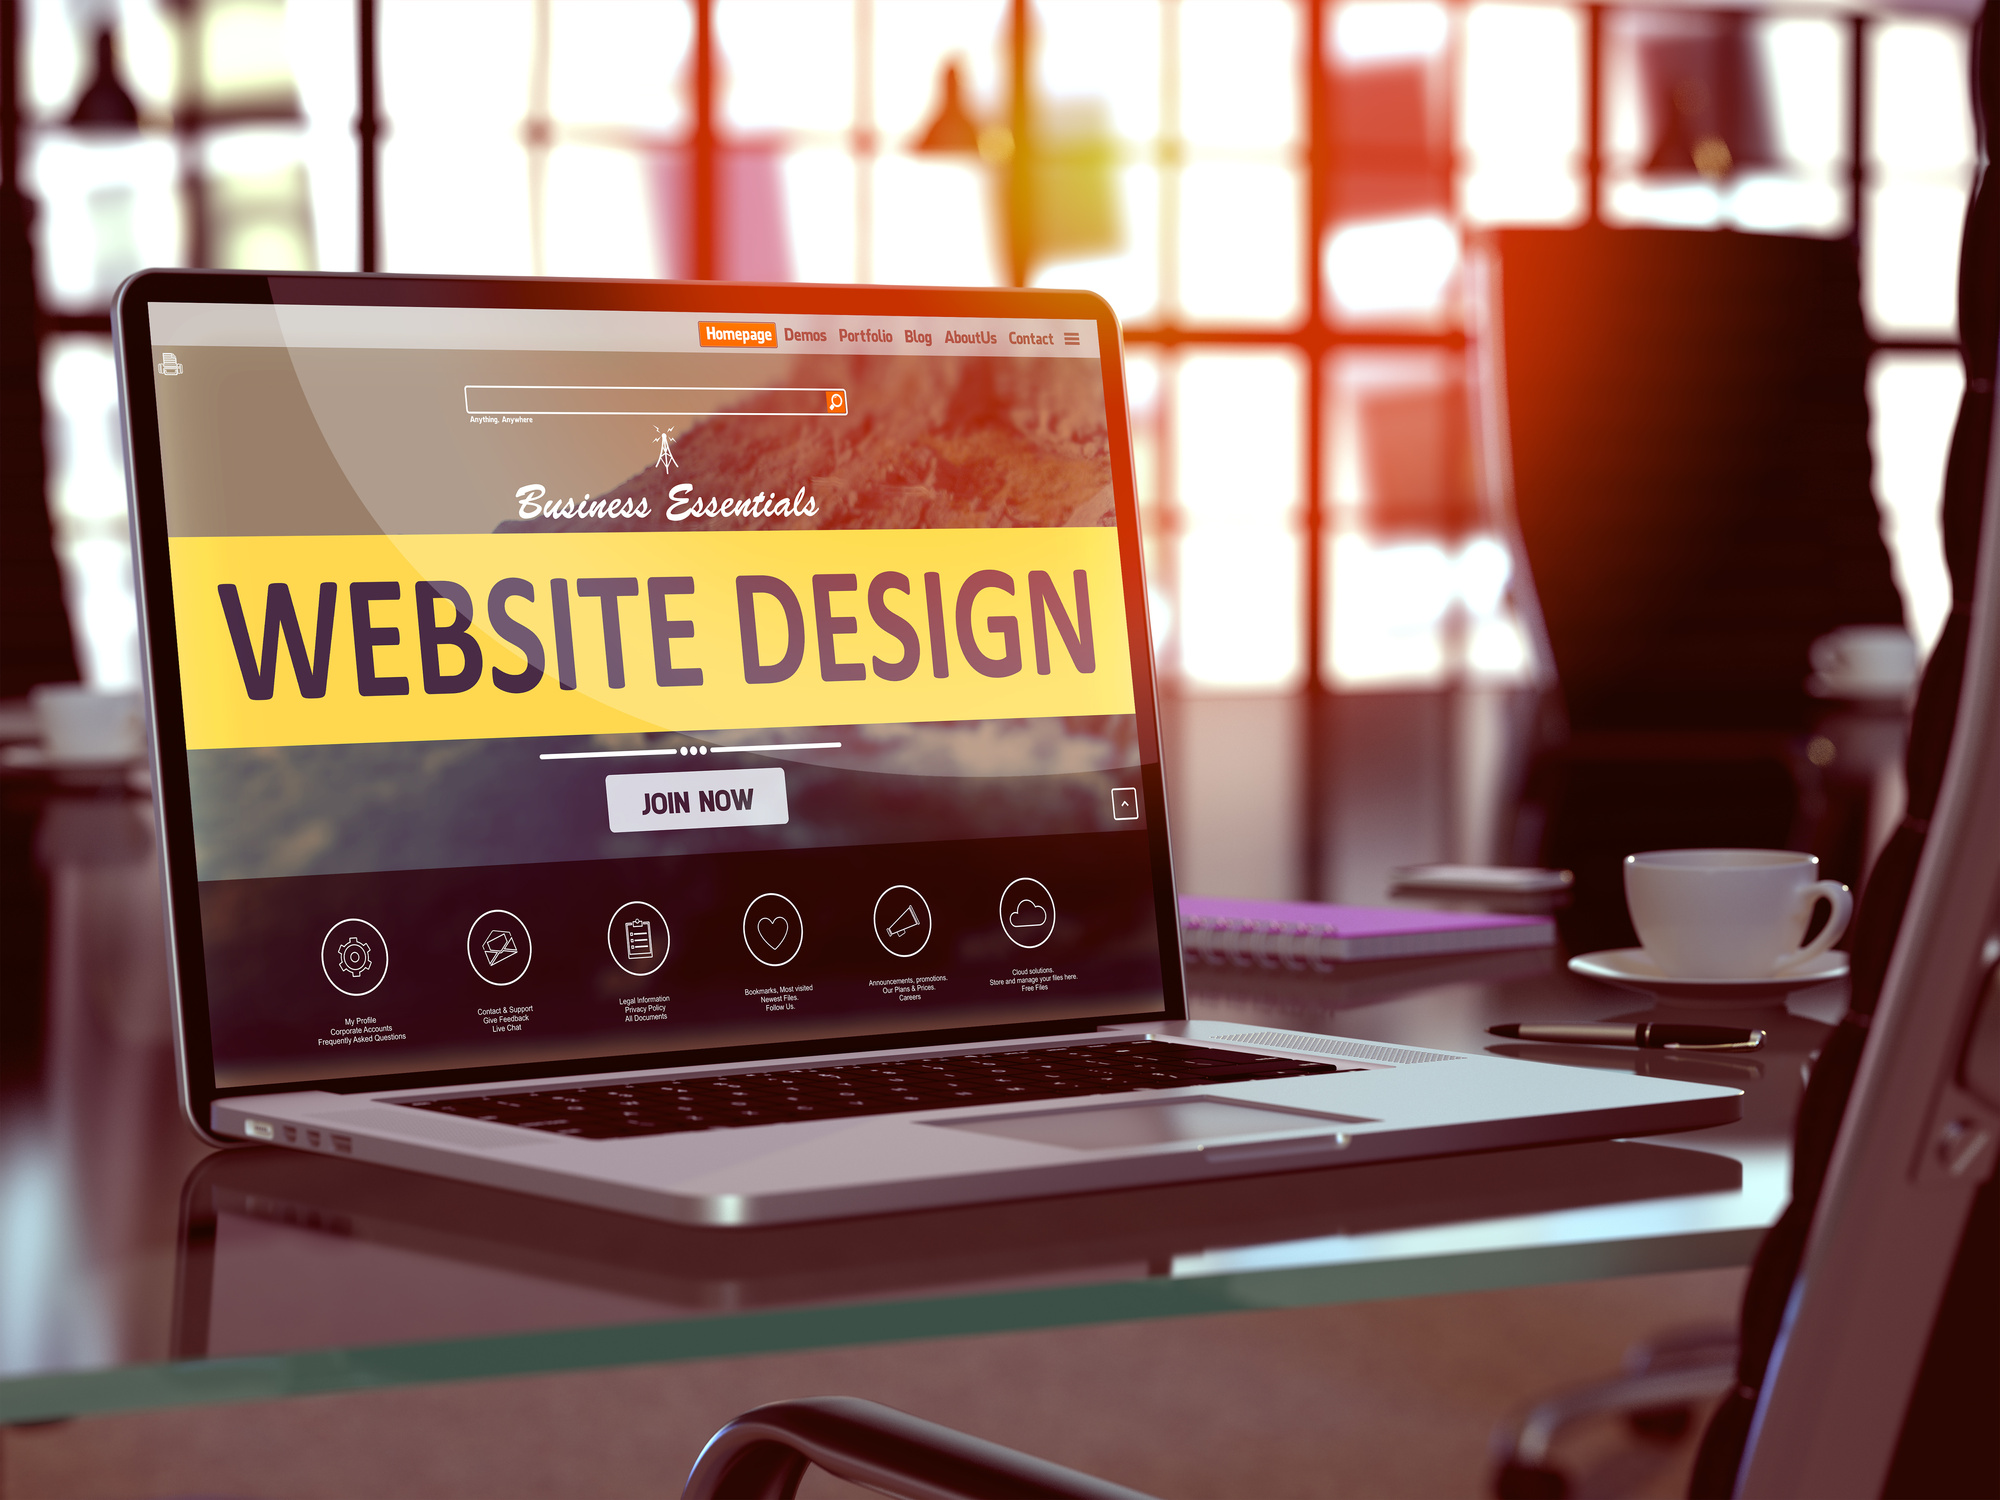 How Does a New Website Design Benefit Your Business?